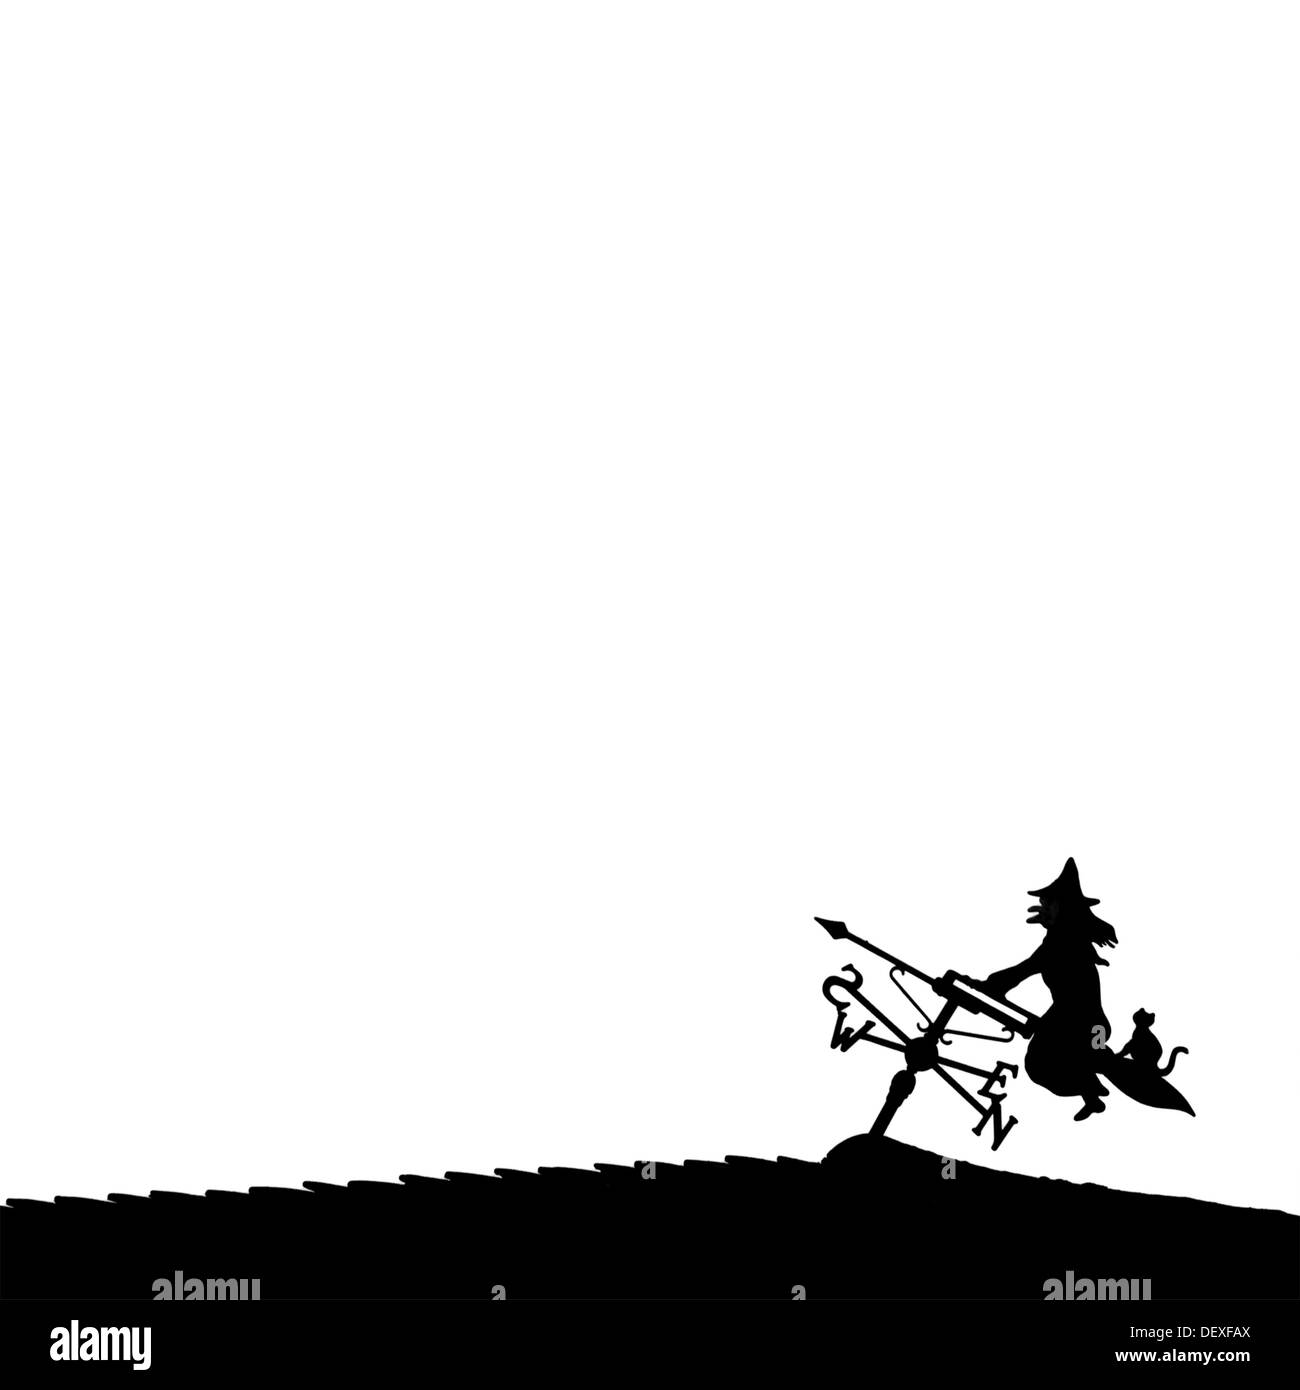 Silhouette of Halloween witch and cat on a broomstick against a white background Stock Photo